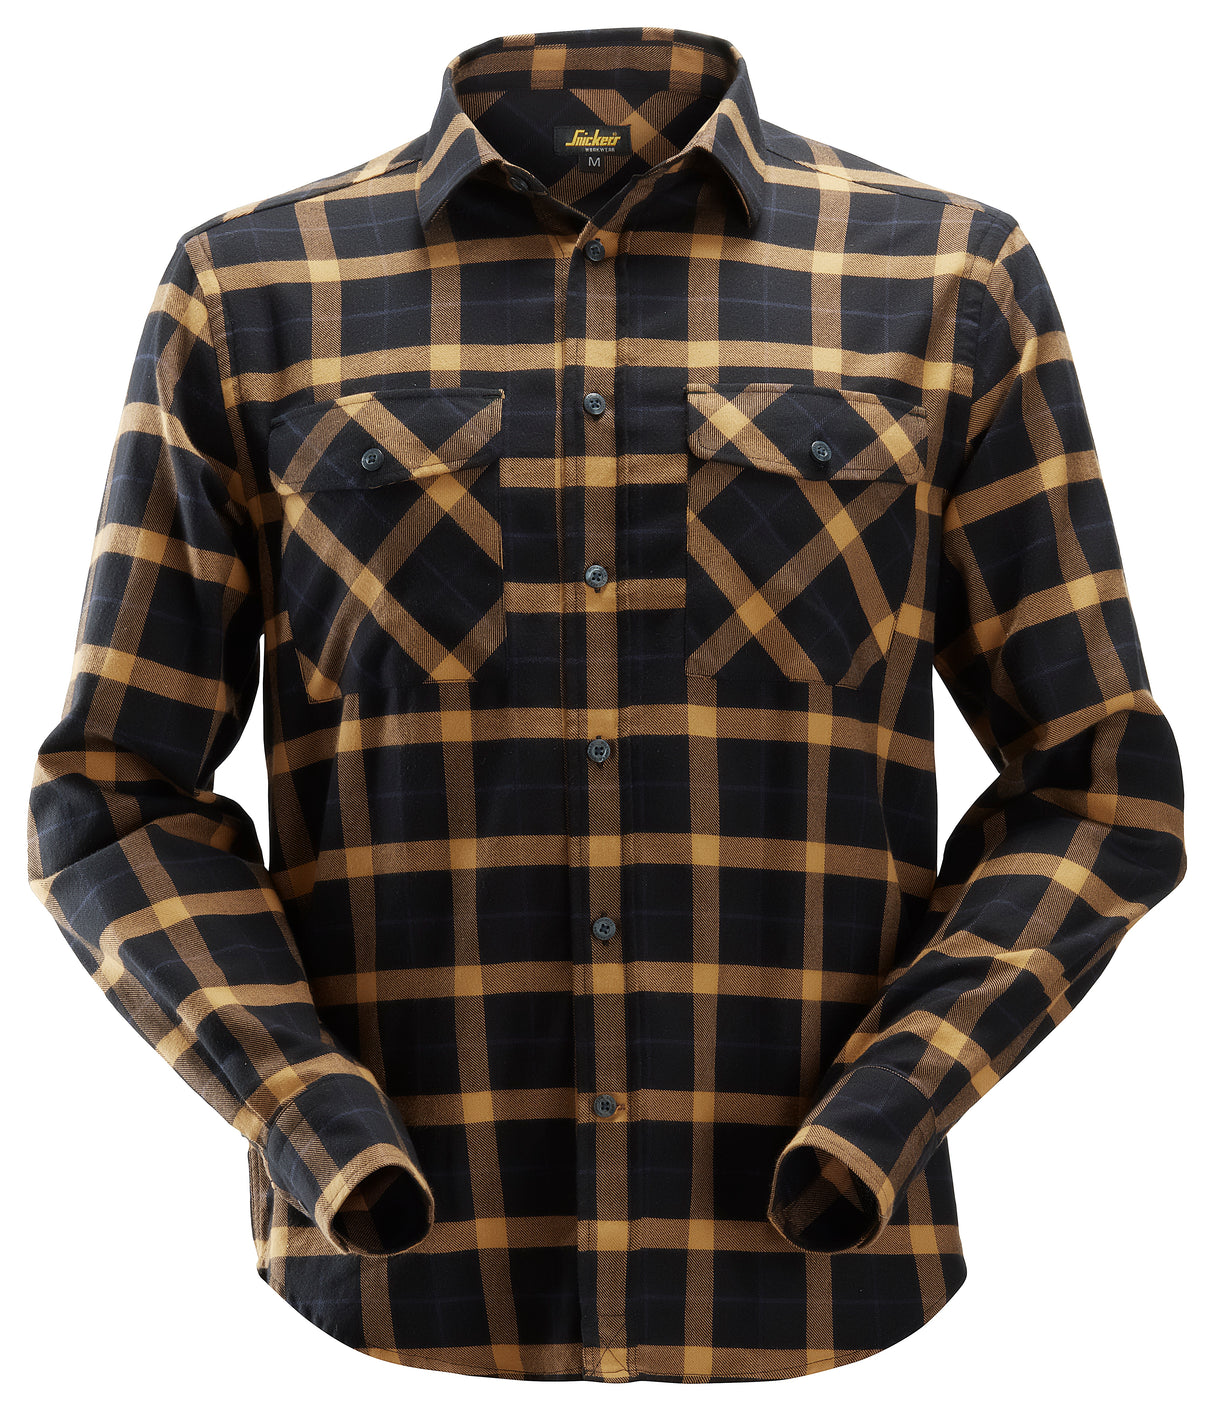 Snickers 8516 Allroundwork Flannel Check Long Sleeve Shirt